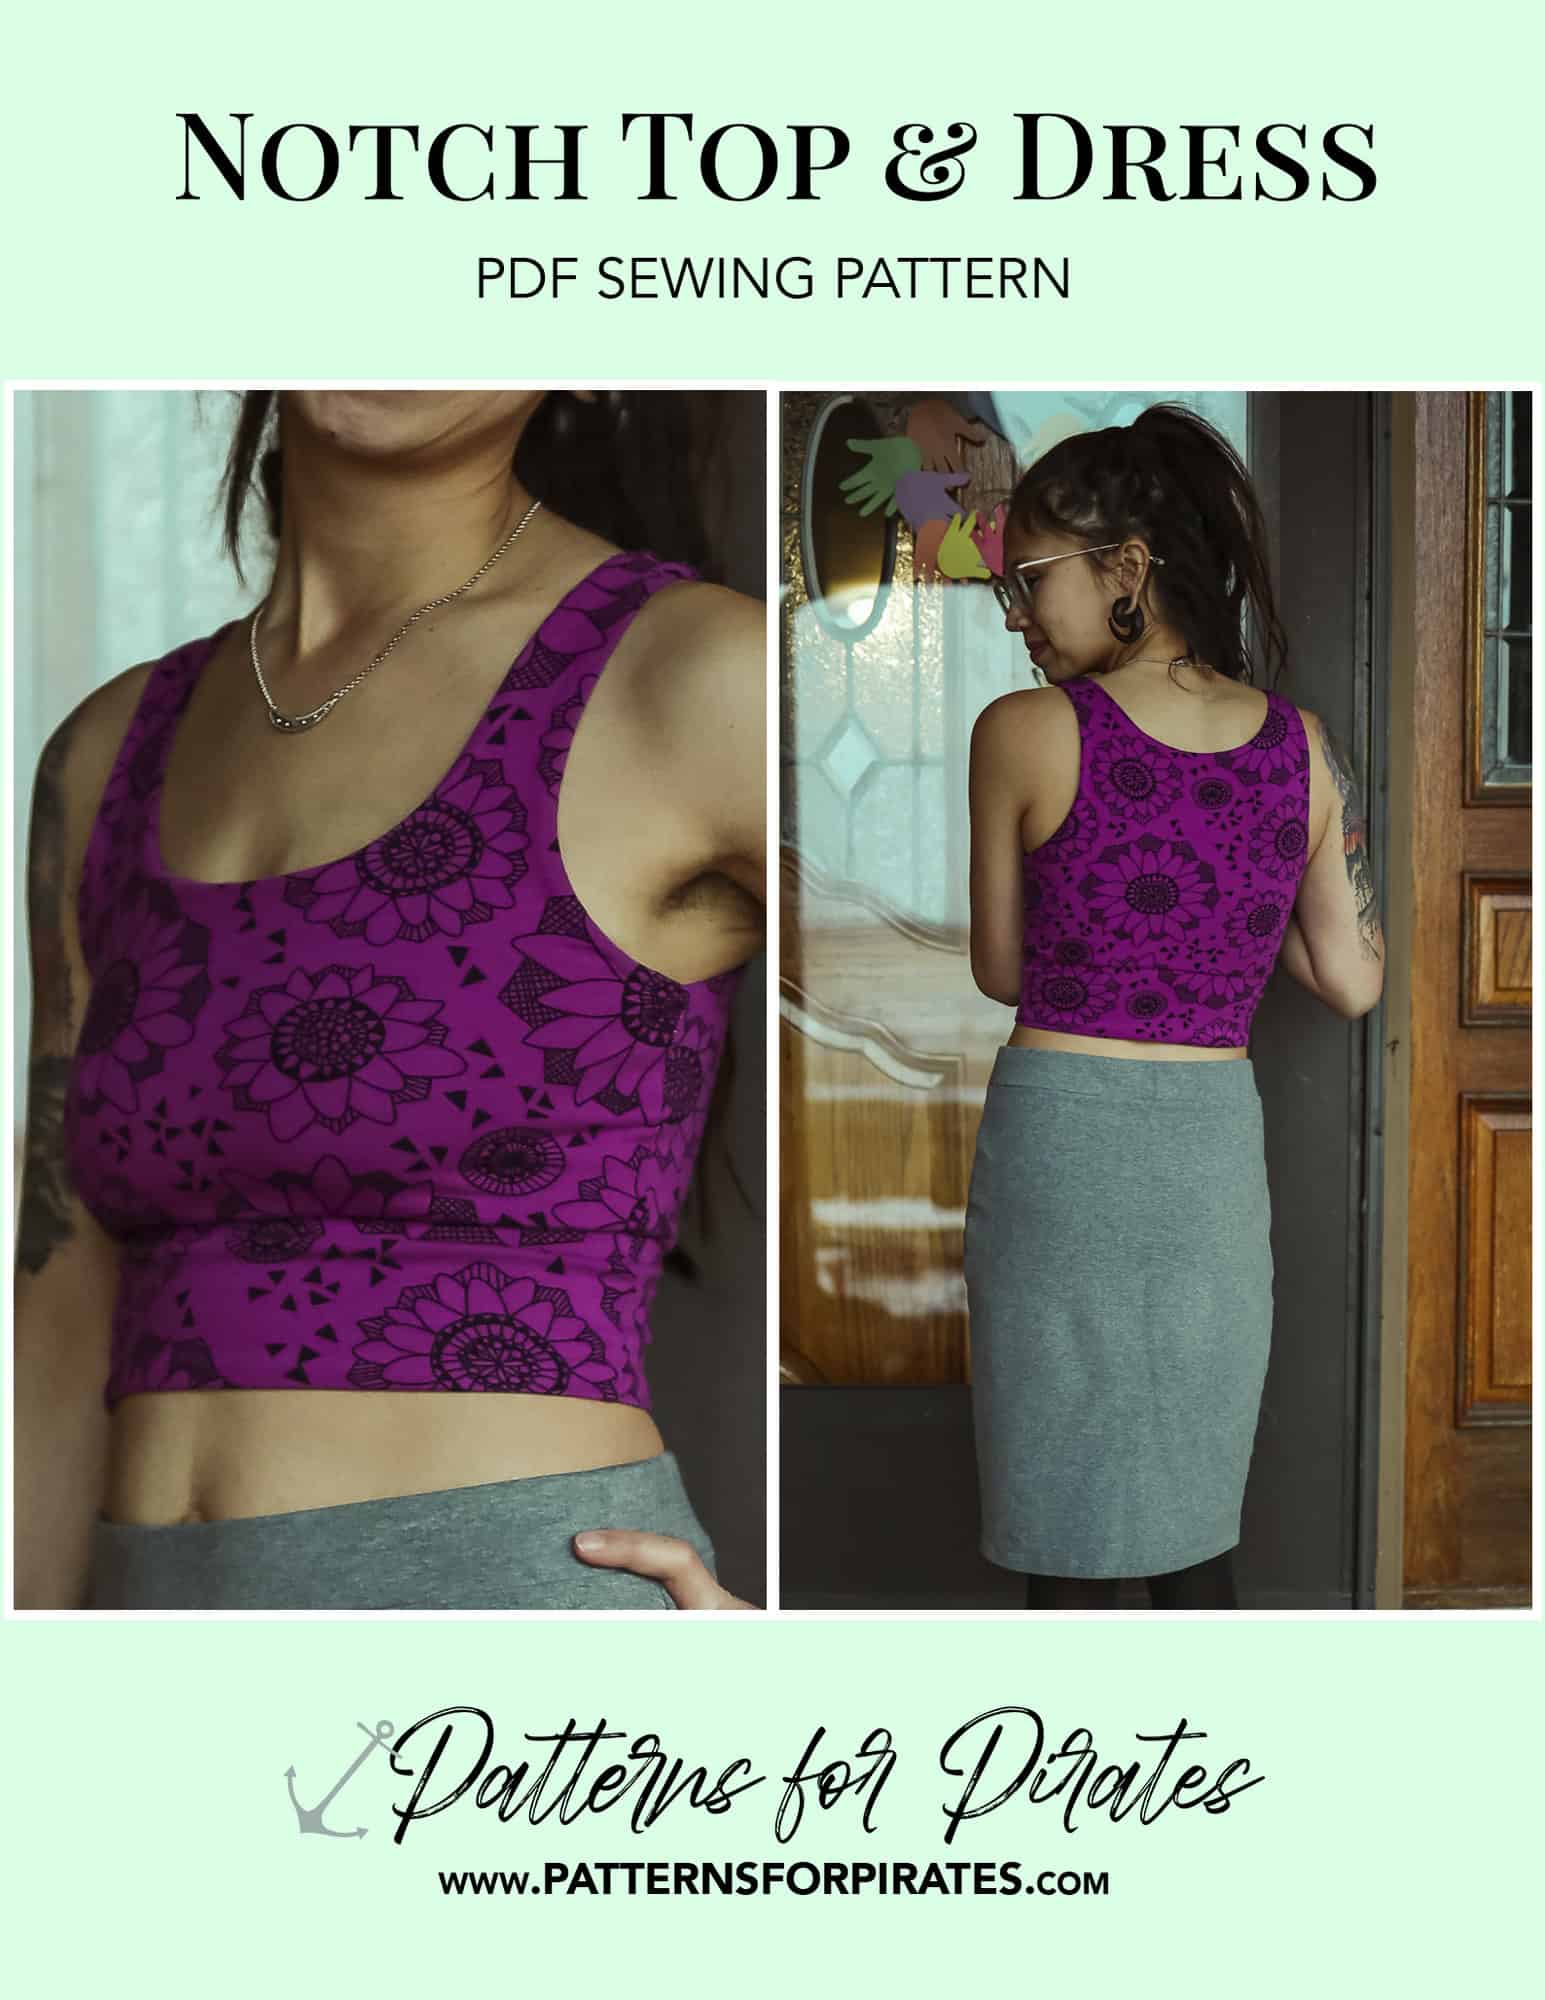 Notch Top & Dress - Patterns for Pirates